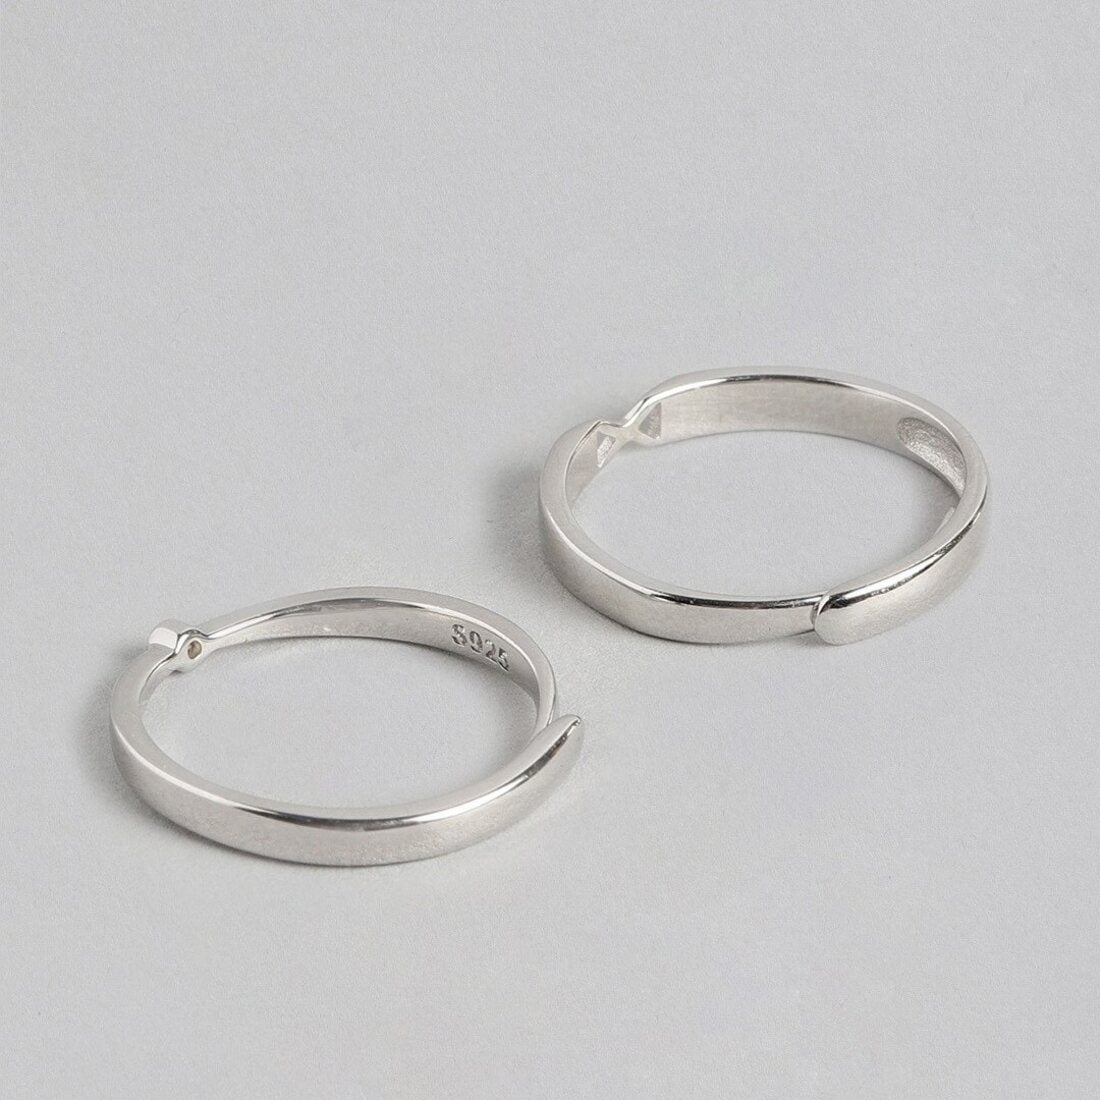 Sweethearts 925 Silver Couple Rings (Adjustable)